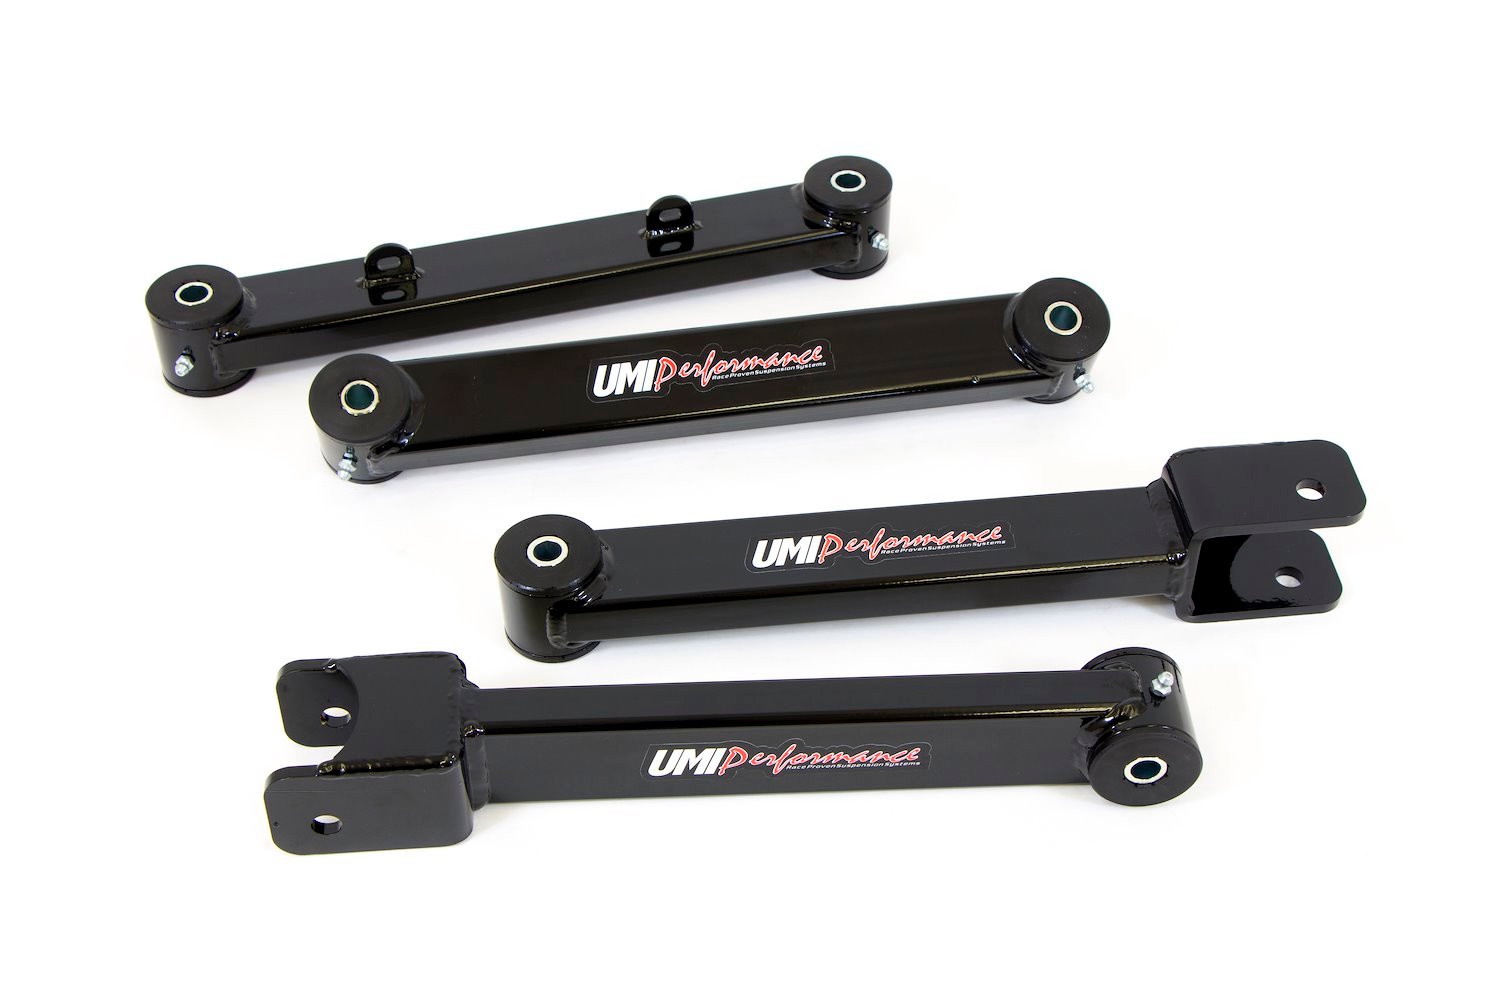 Rear suspension kit from UMI includes heavy duty